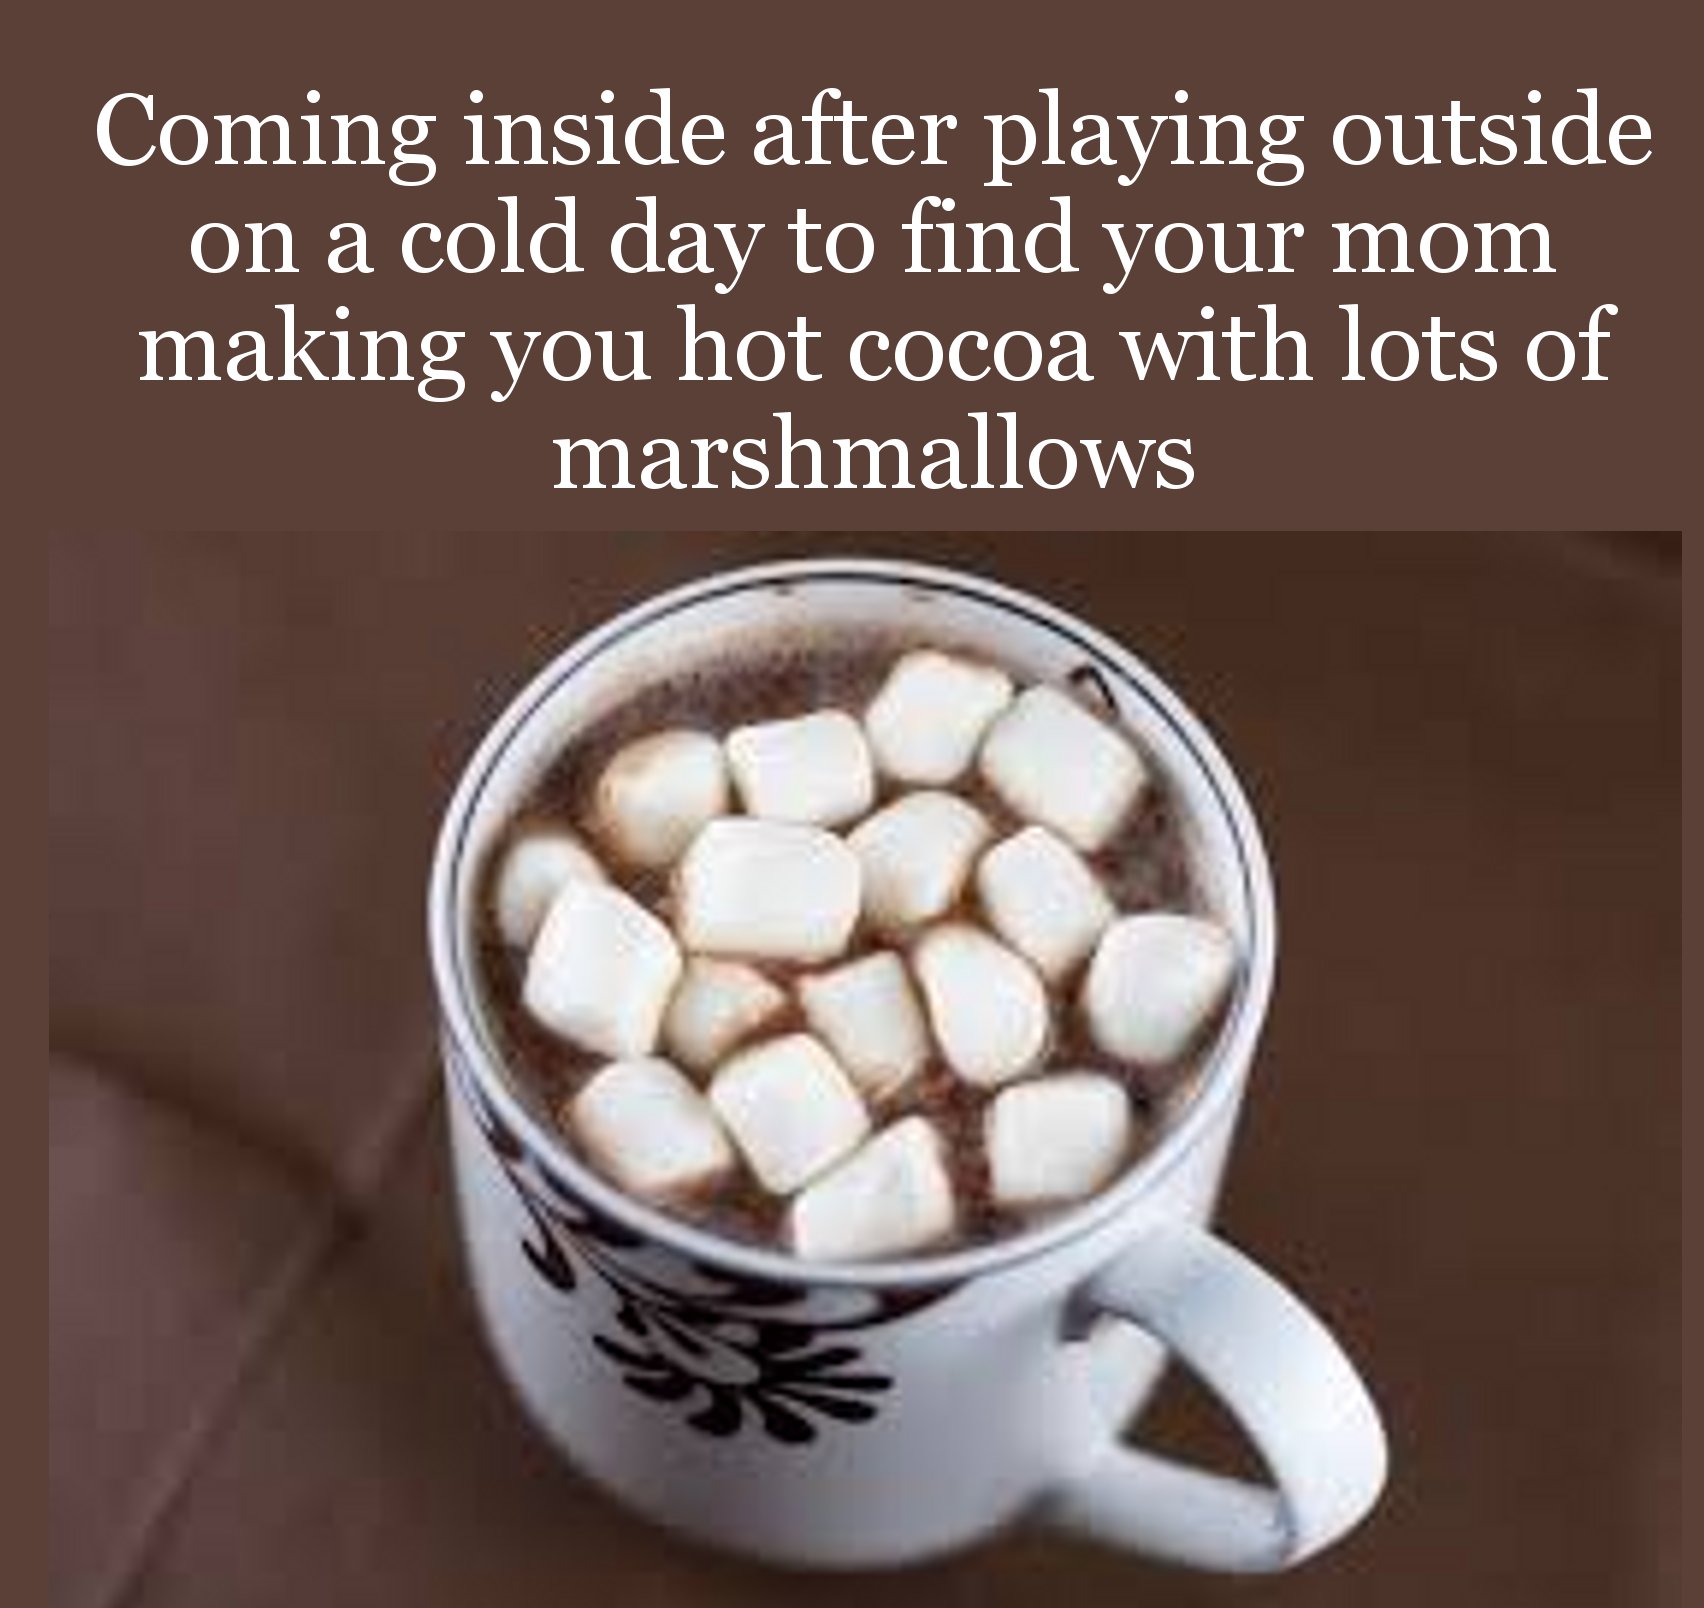 quotes - Coming inside after playing outside on a cold day to find your mom making you hot cocoa with lots of marshmallows